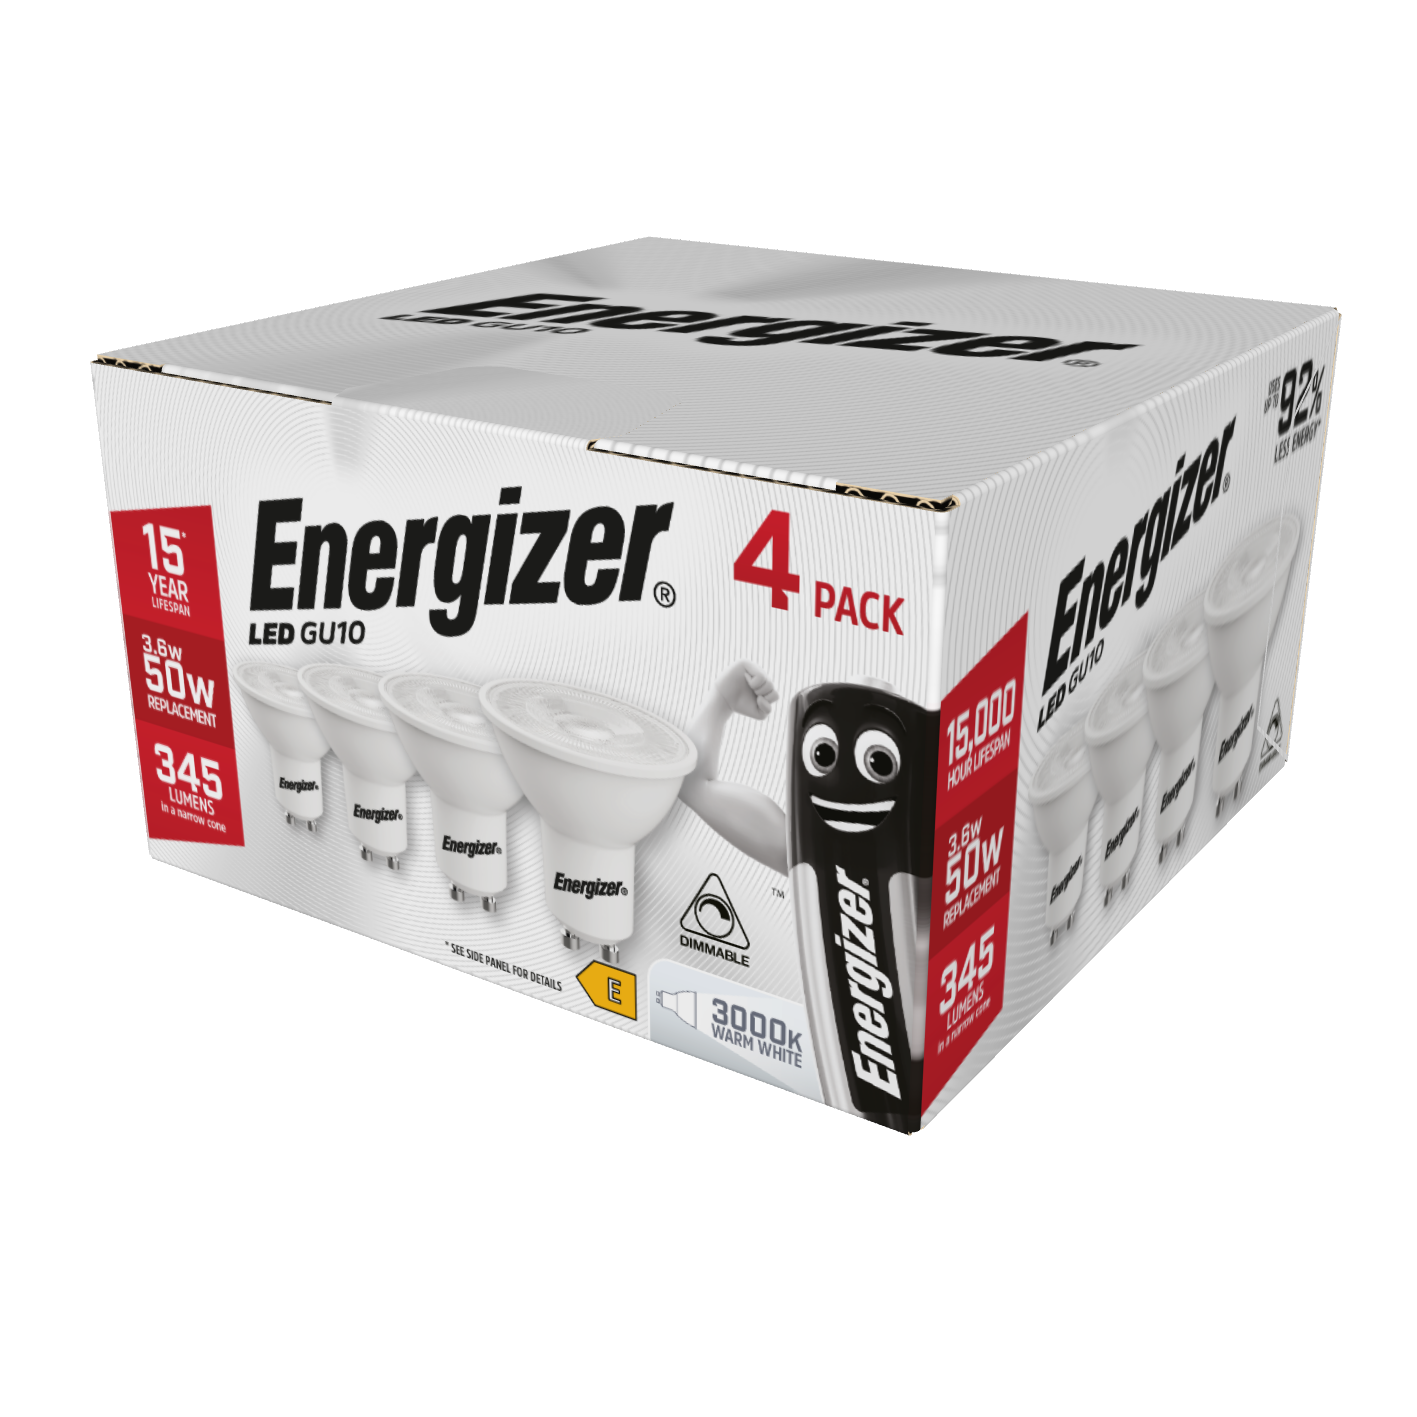 Energizer LED GU10 345lm 3.6W 4,000K (Cool White) Dimmable, Box of 4